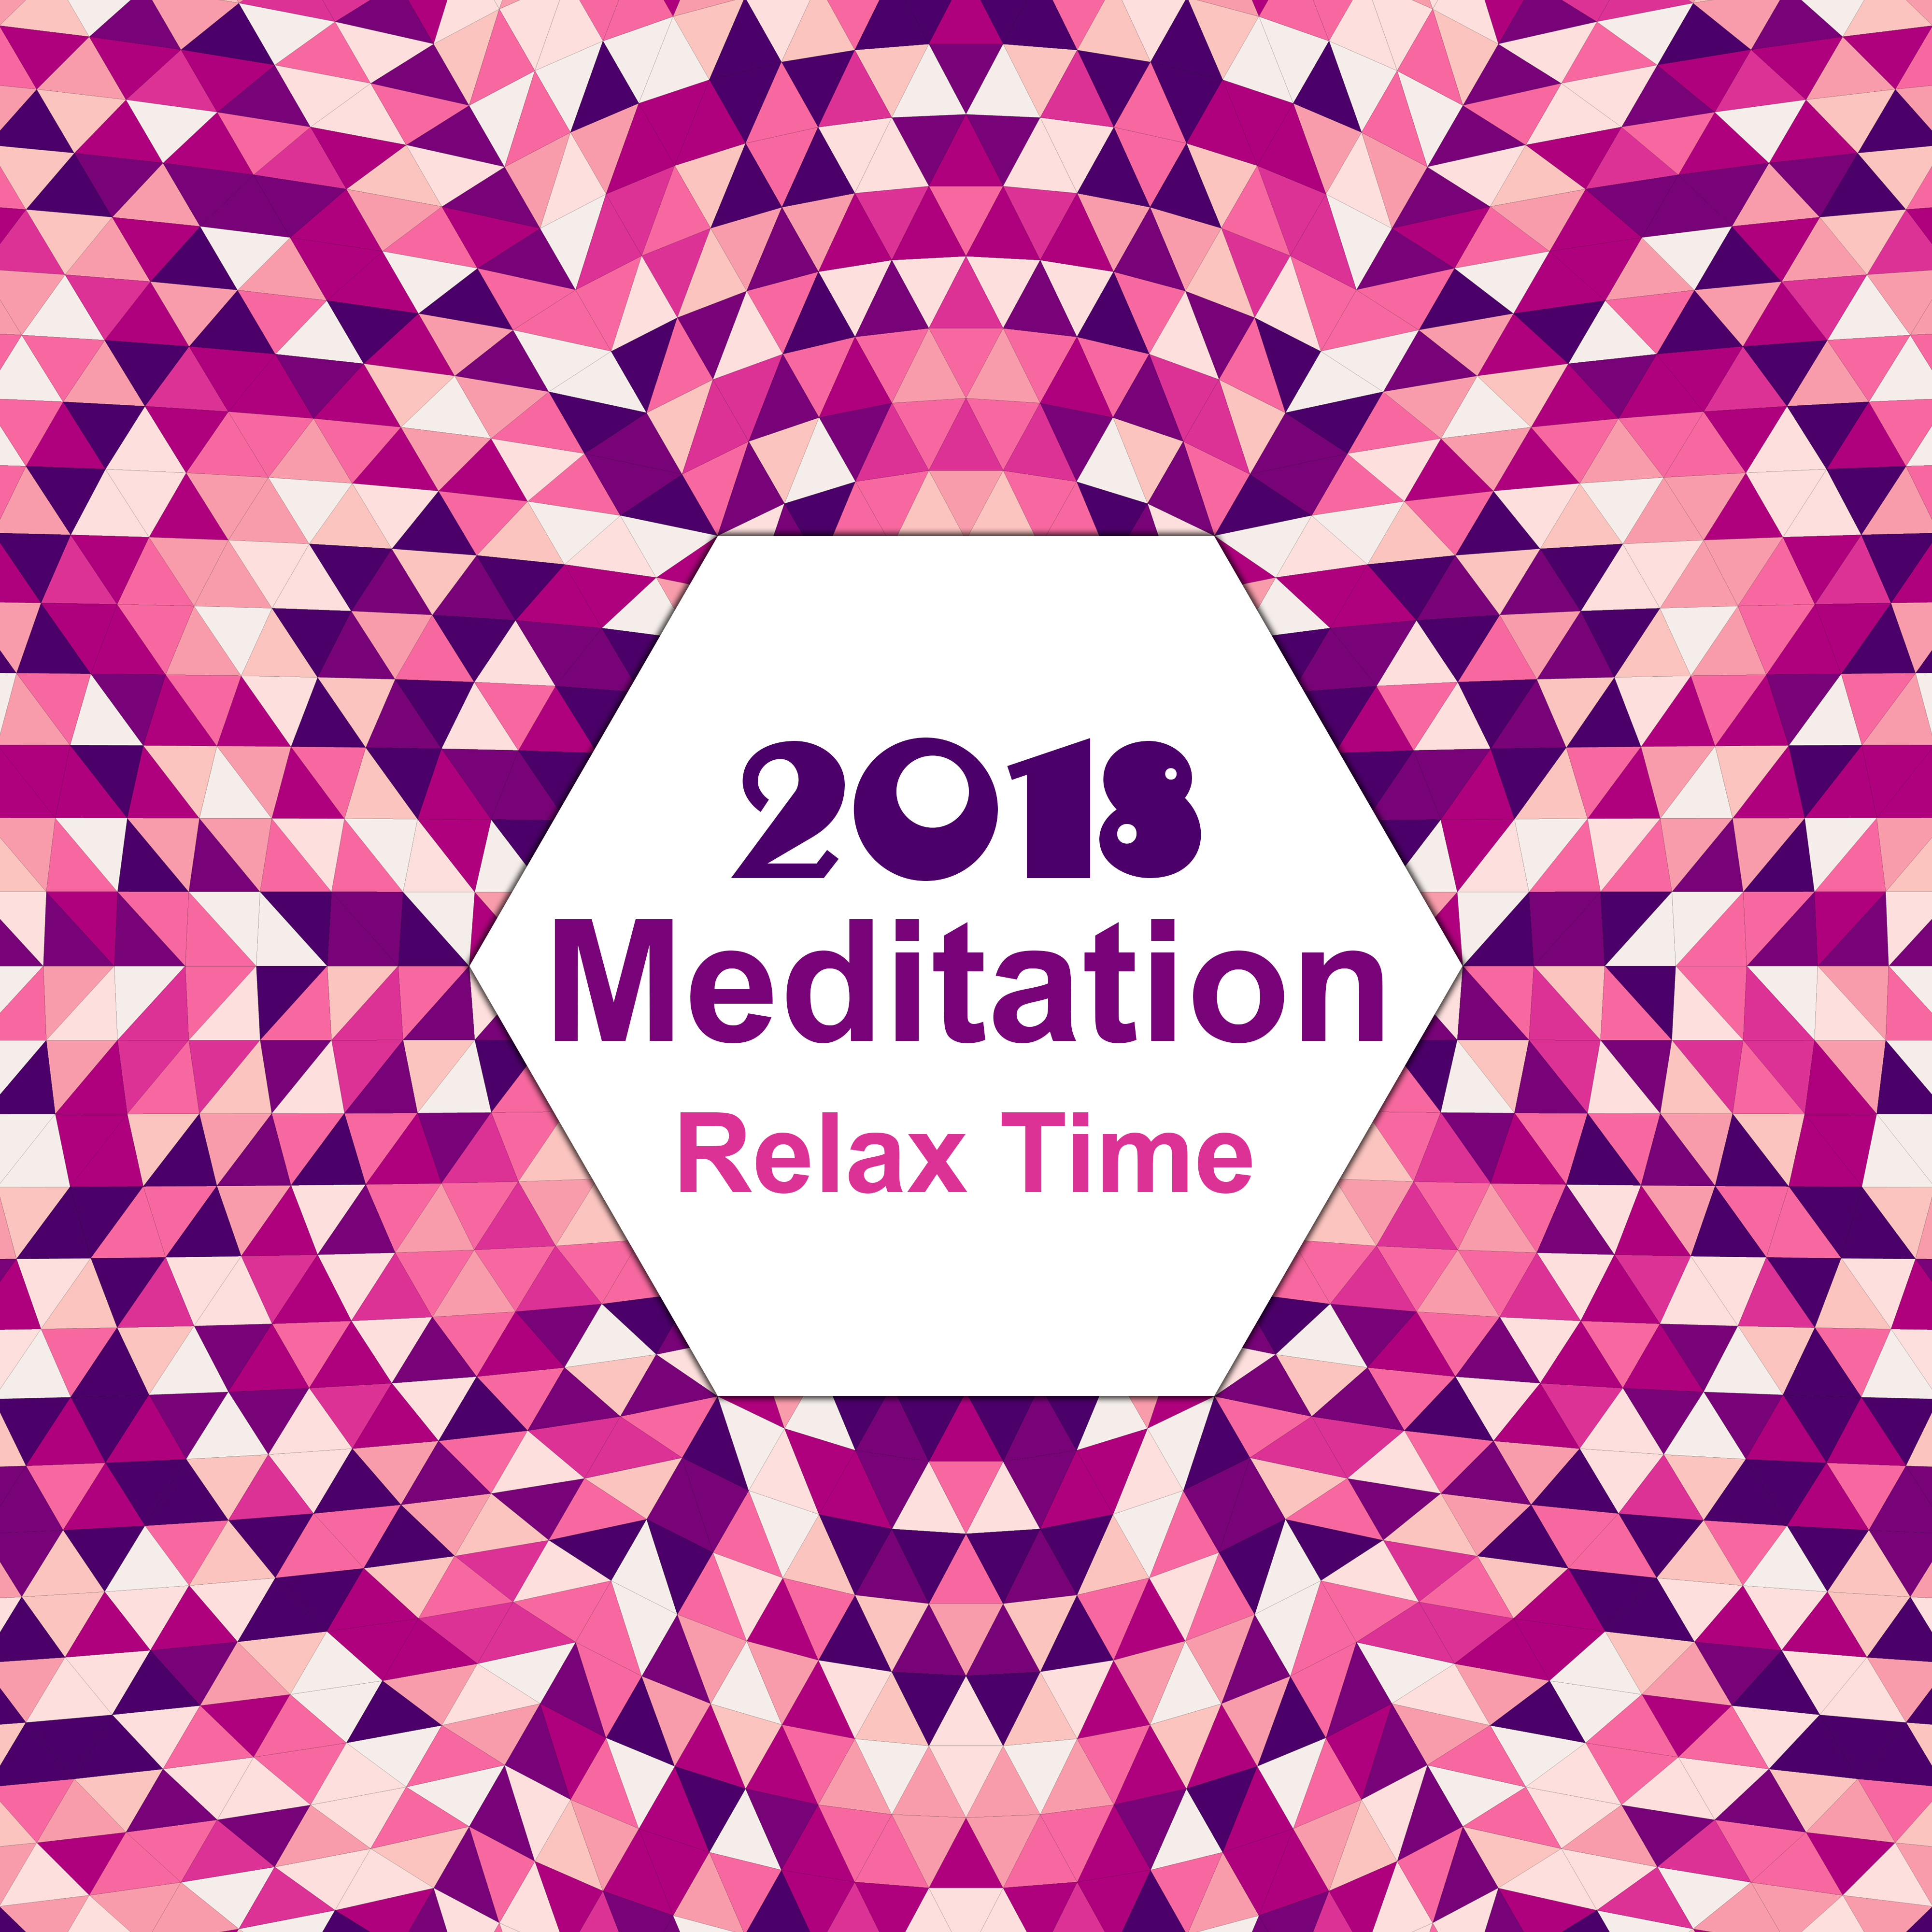 2018 Meditation Relax Time